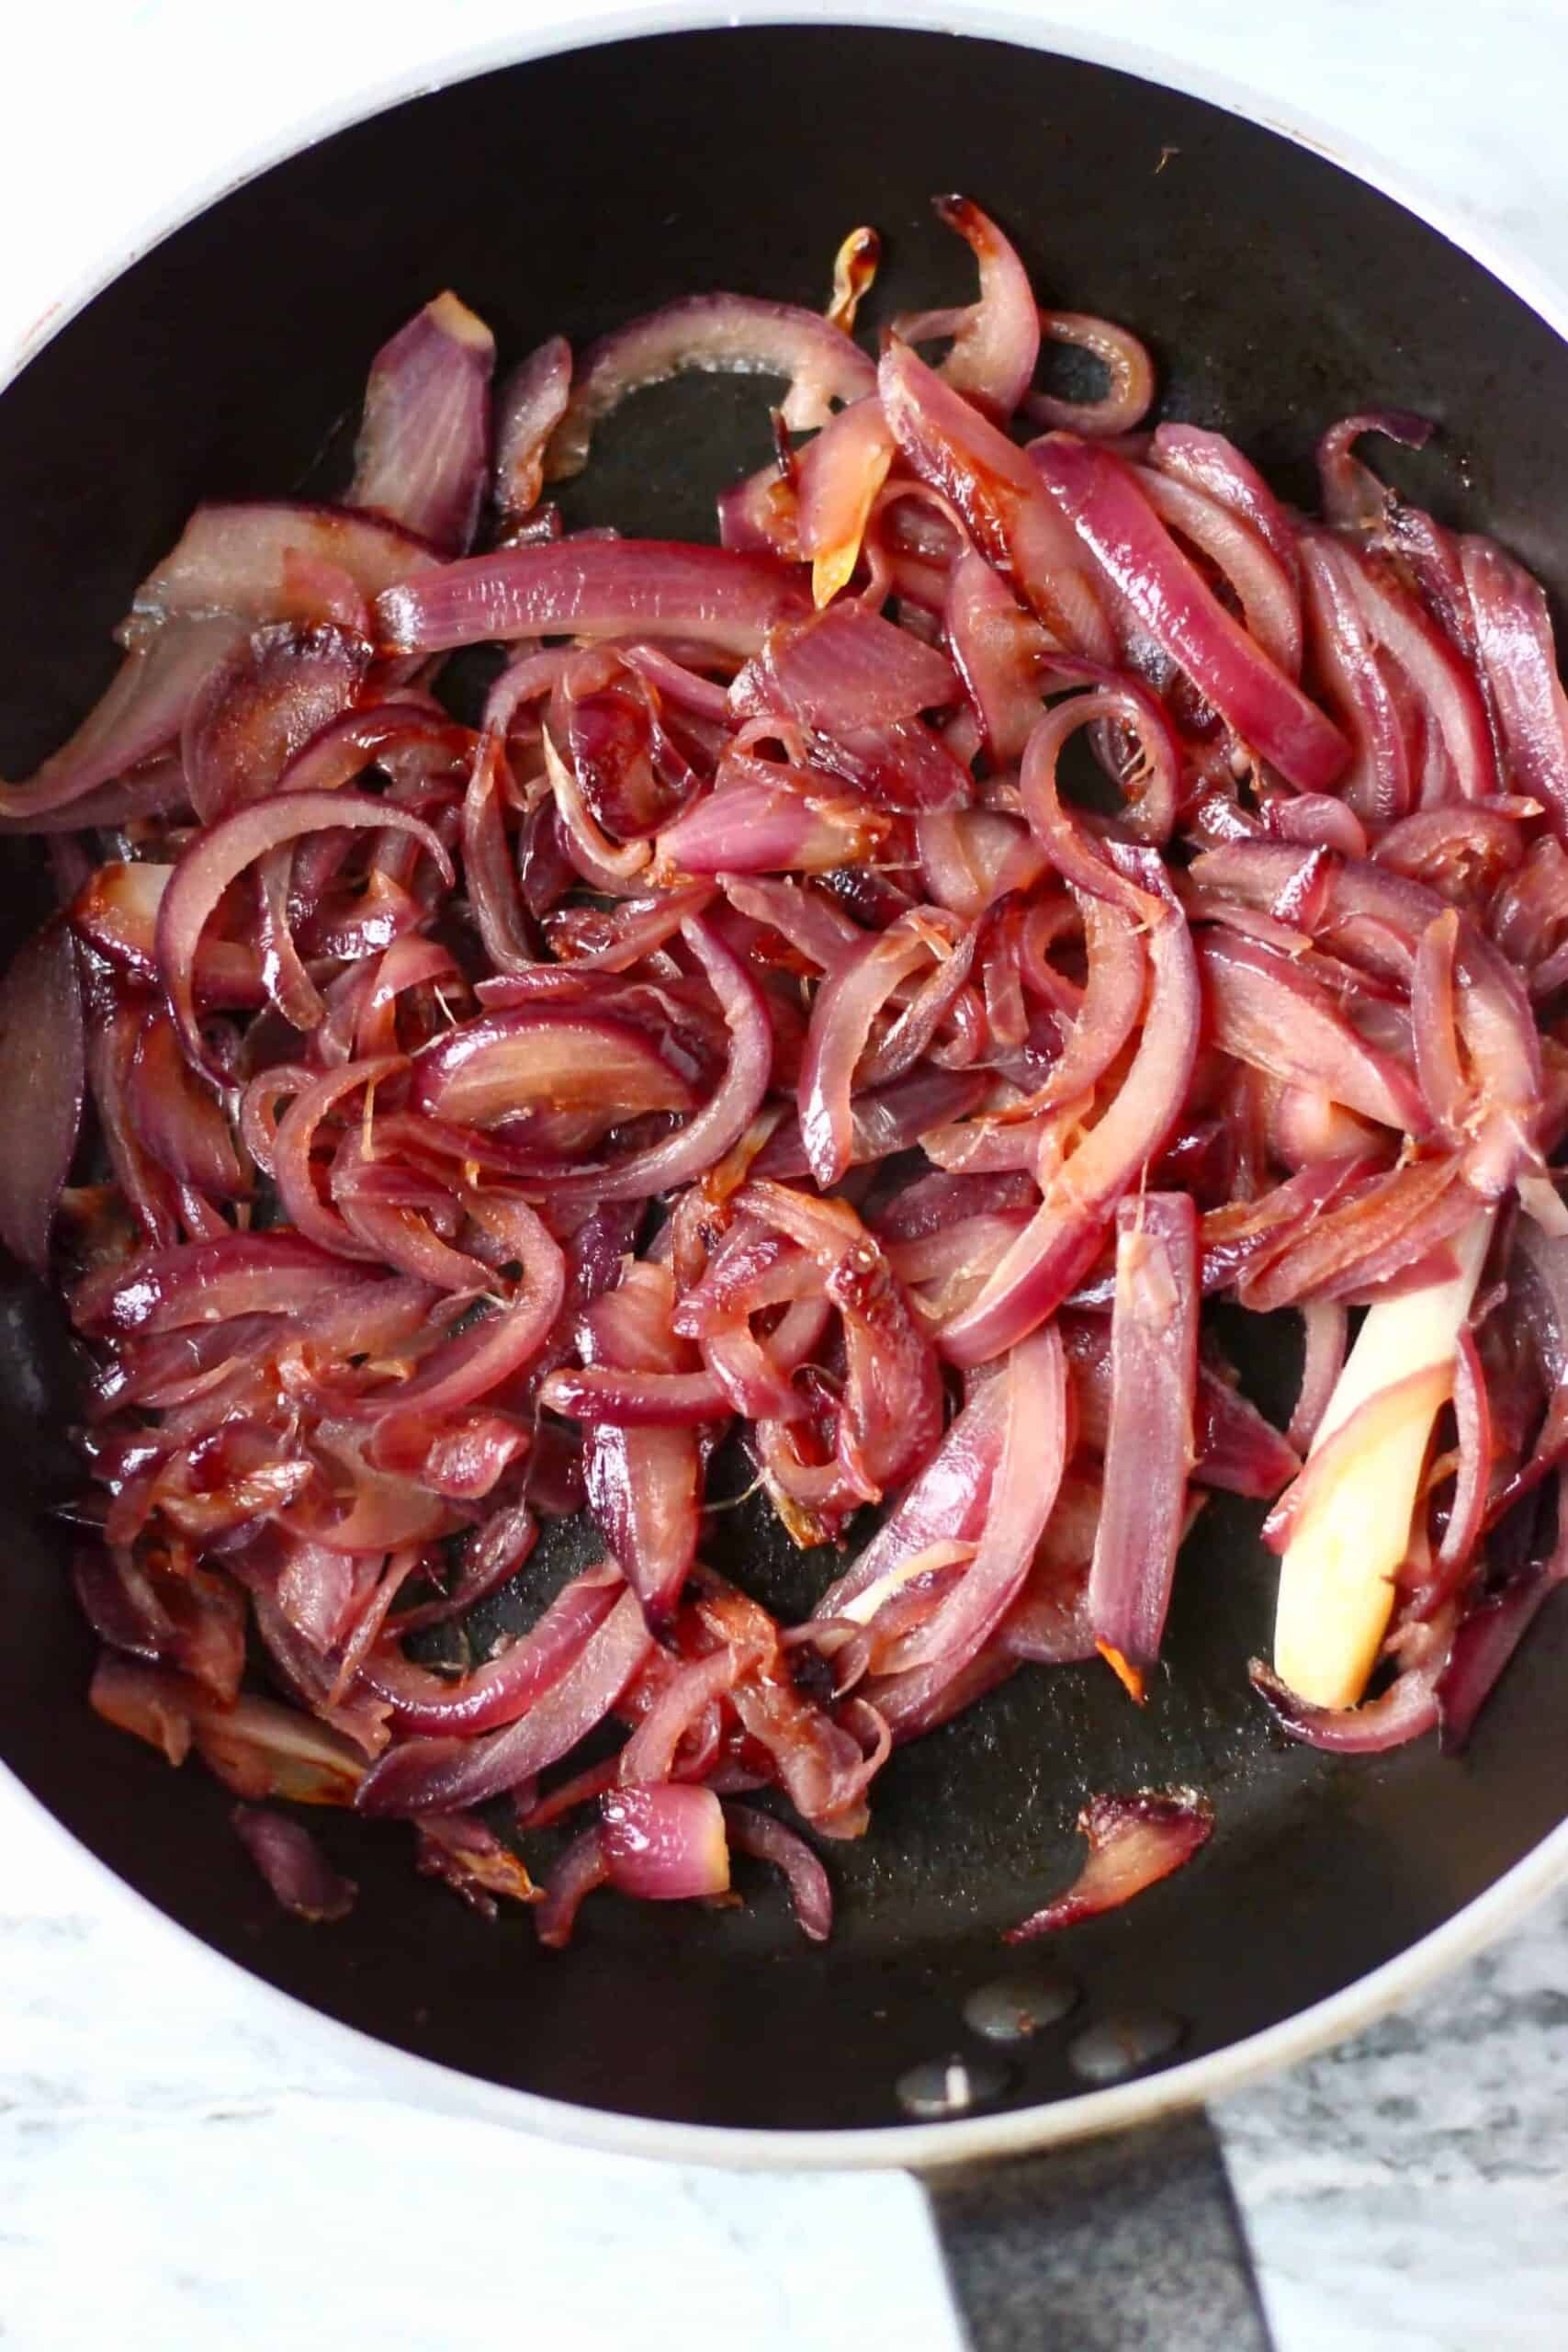 Sliced red onions being cooked in a frying pan